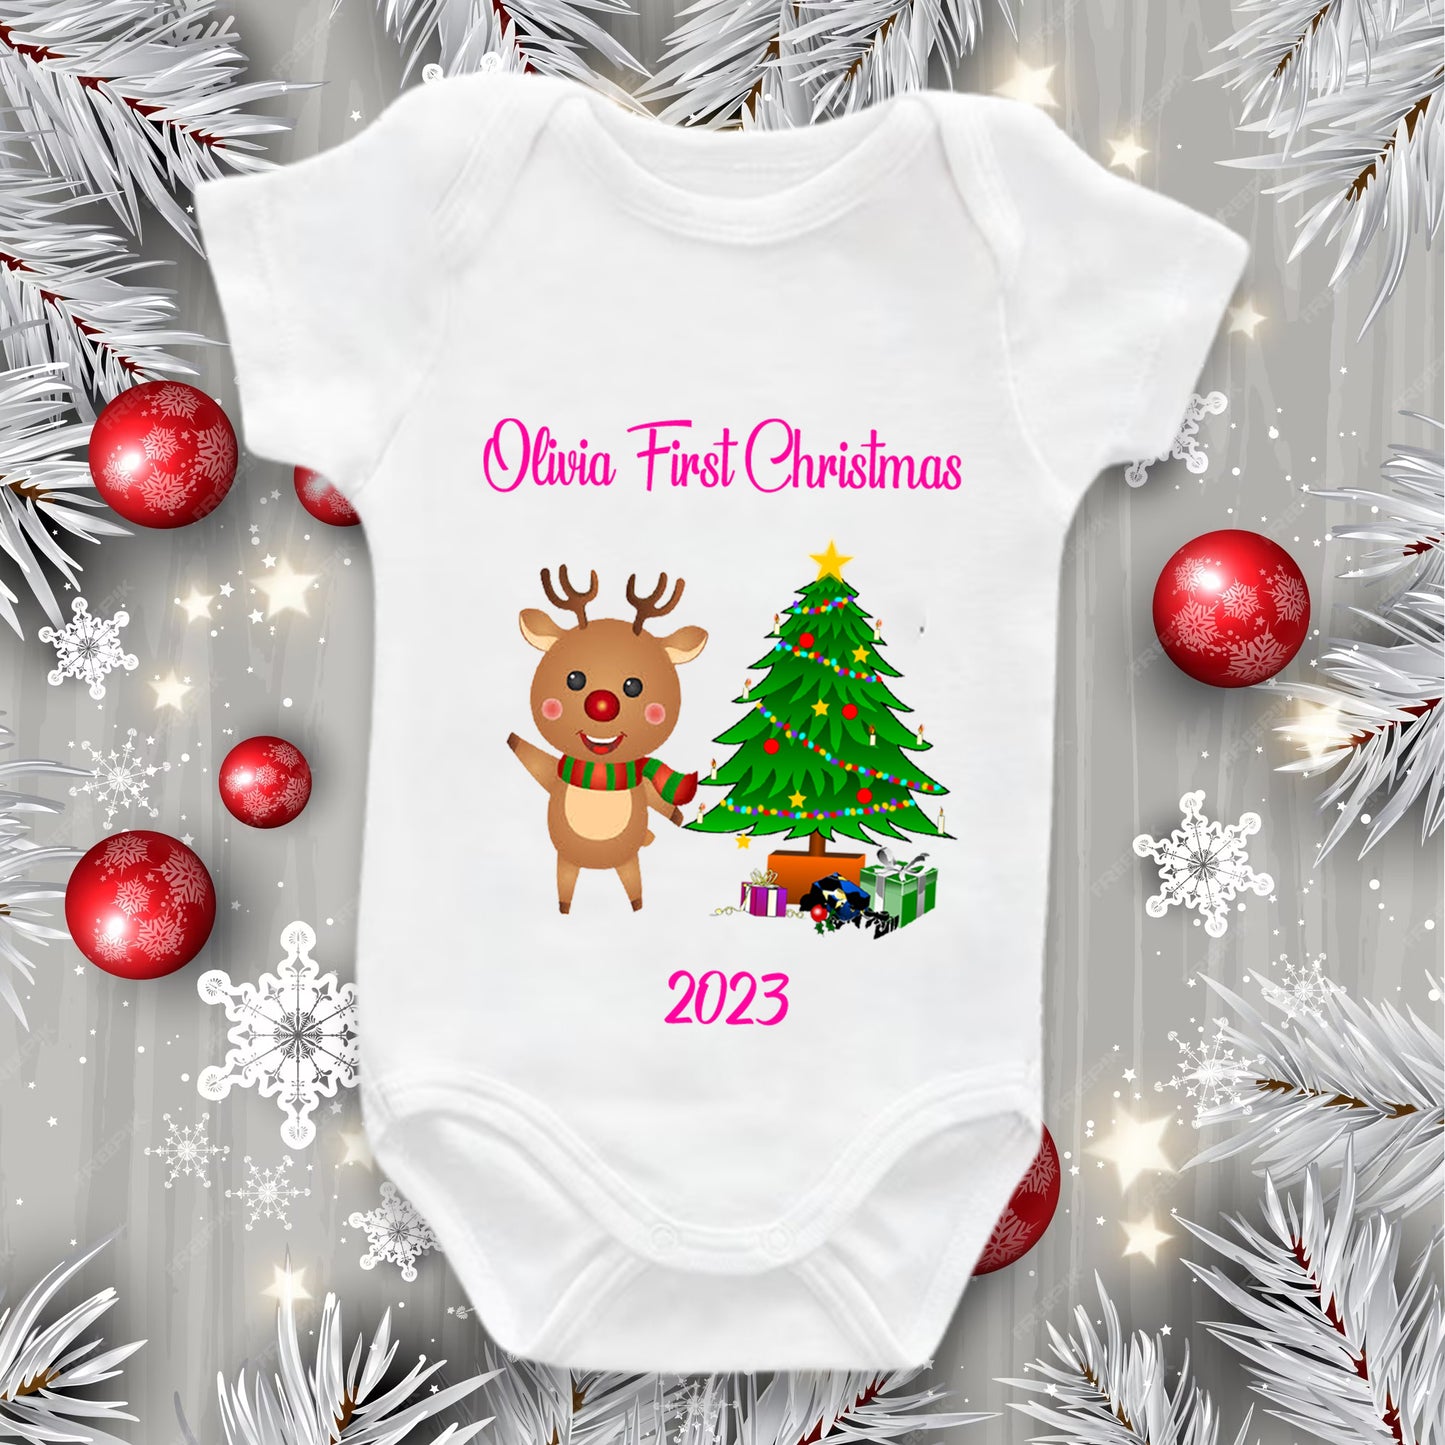 My first Christmas Outfit